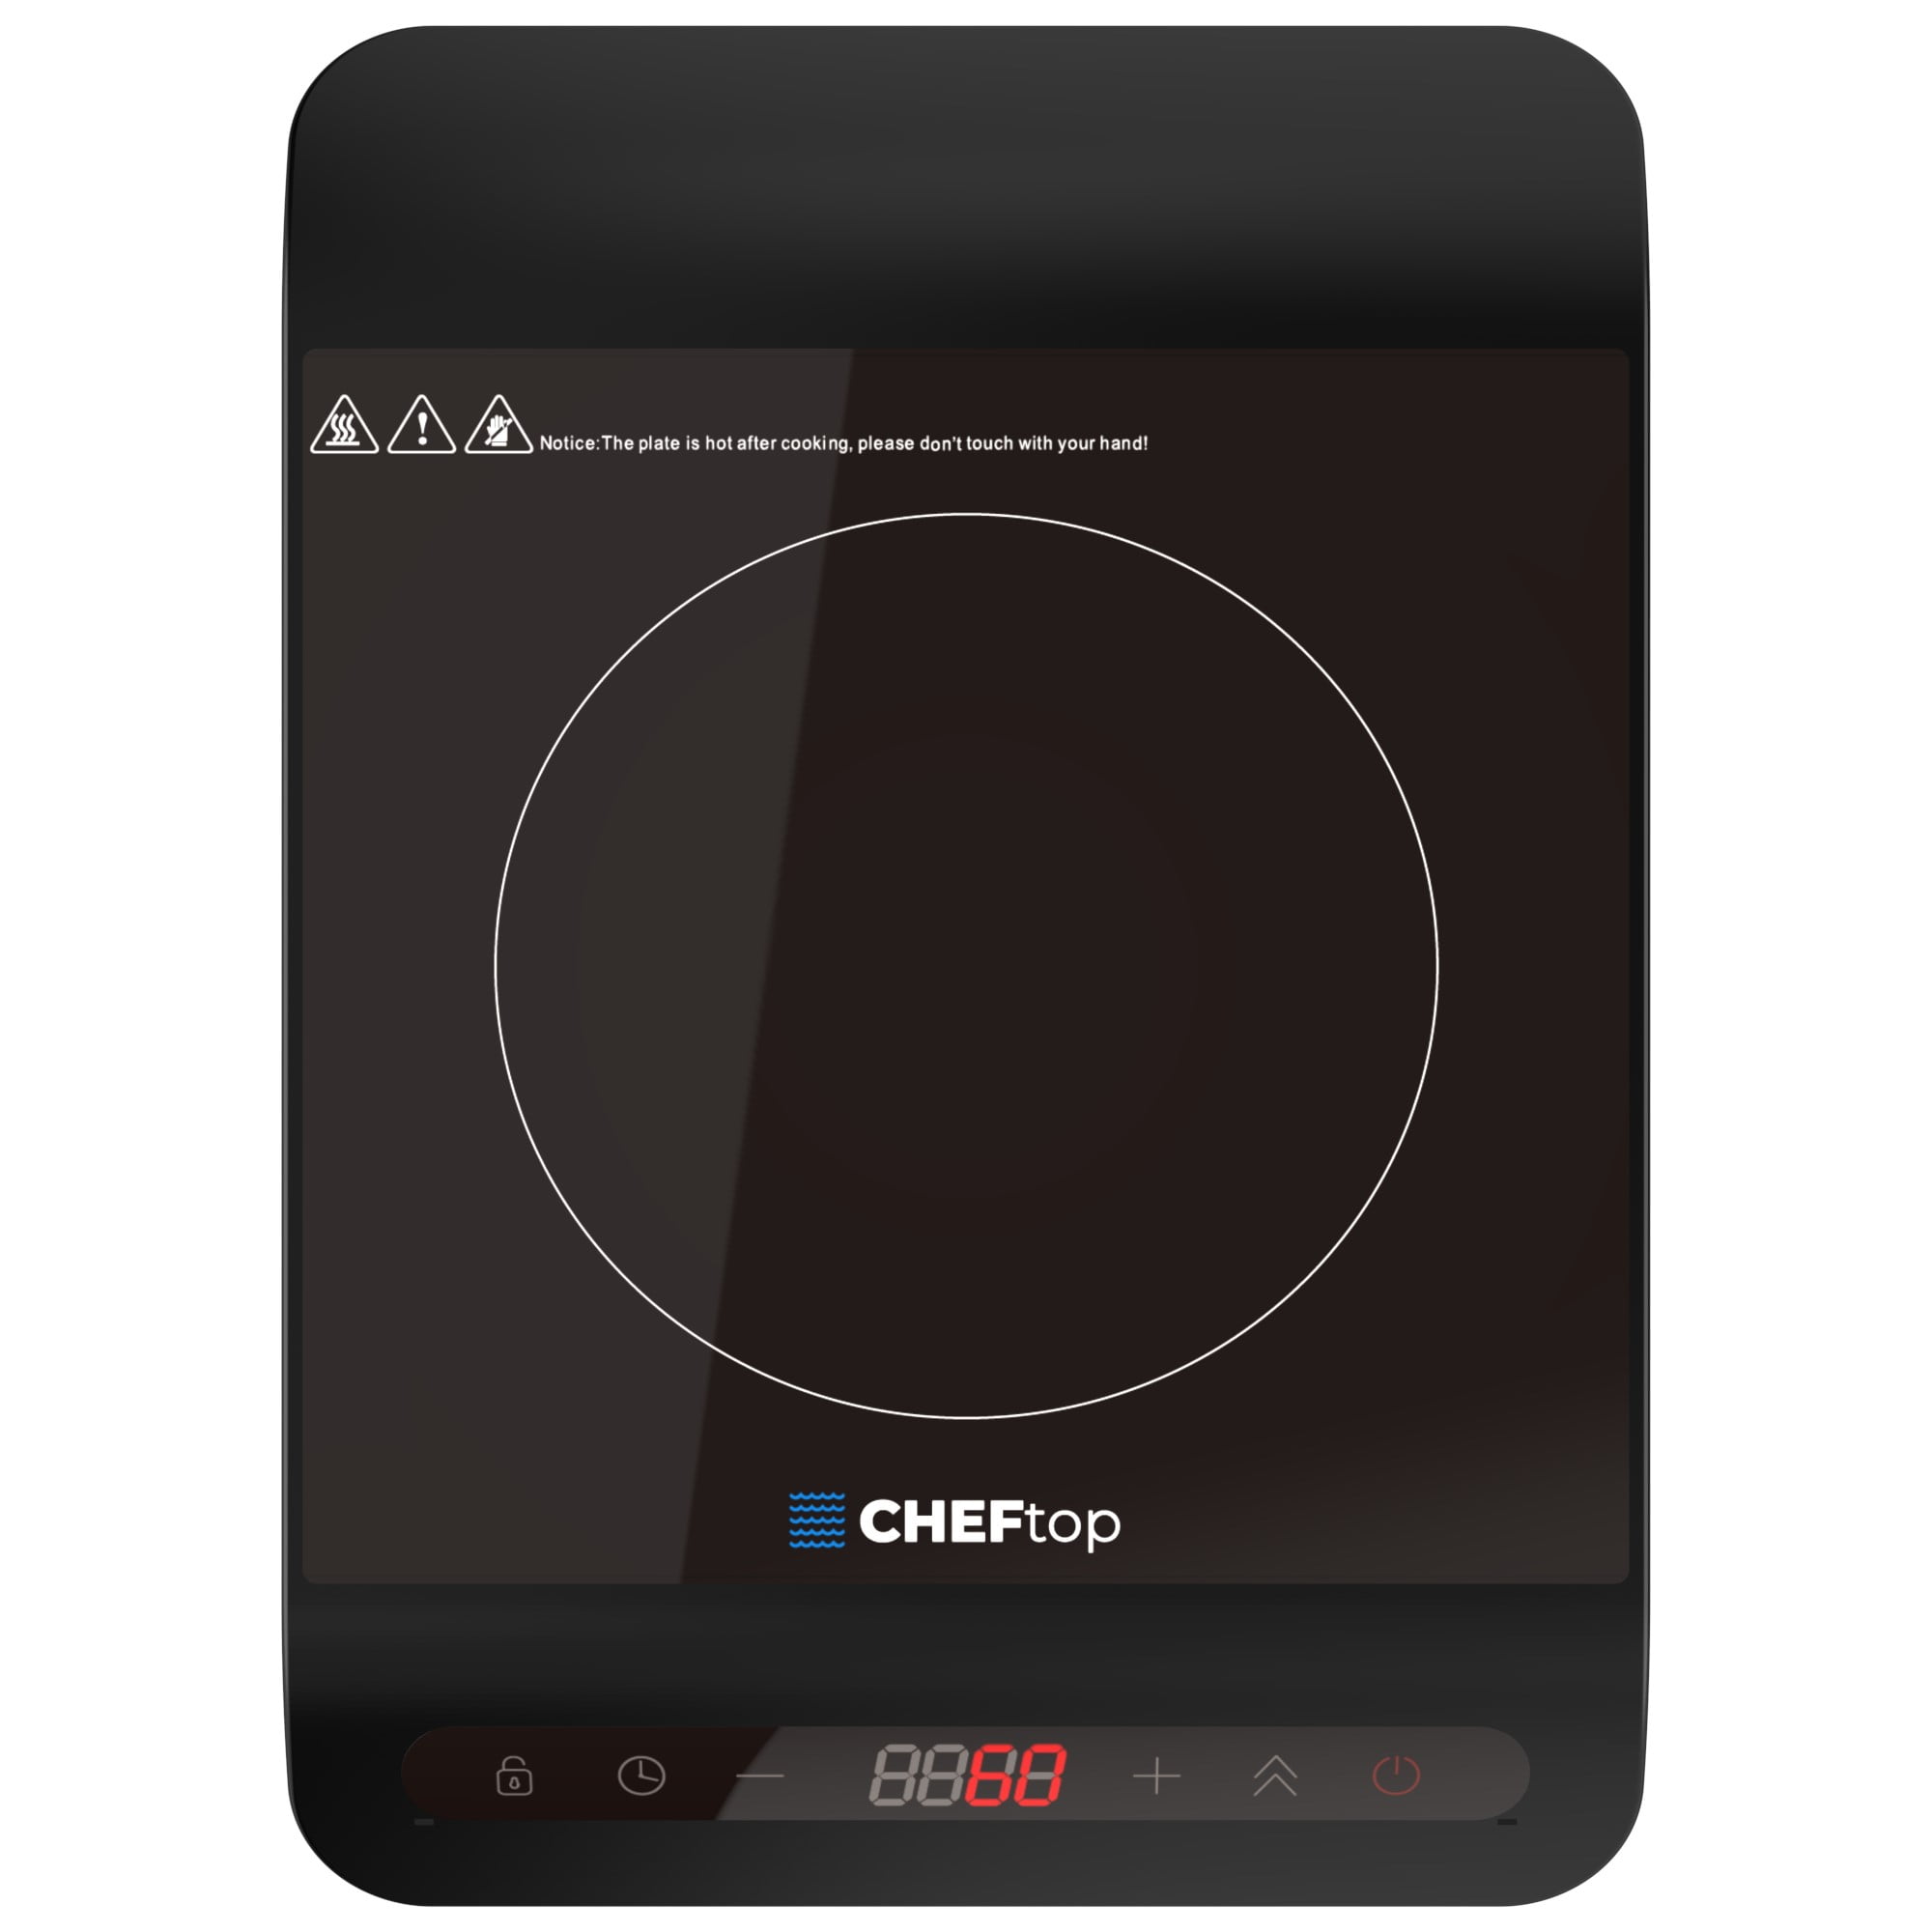 RecPro RV Induction Cooktop | 1300 Watt Single Burner | Electric Range for Countertop Use | Portable